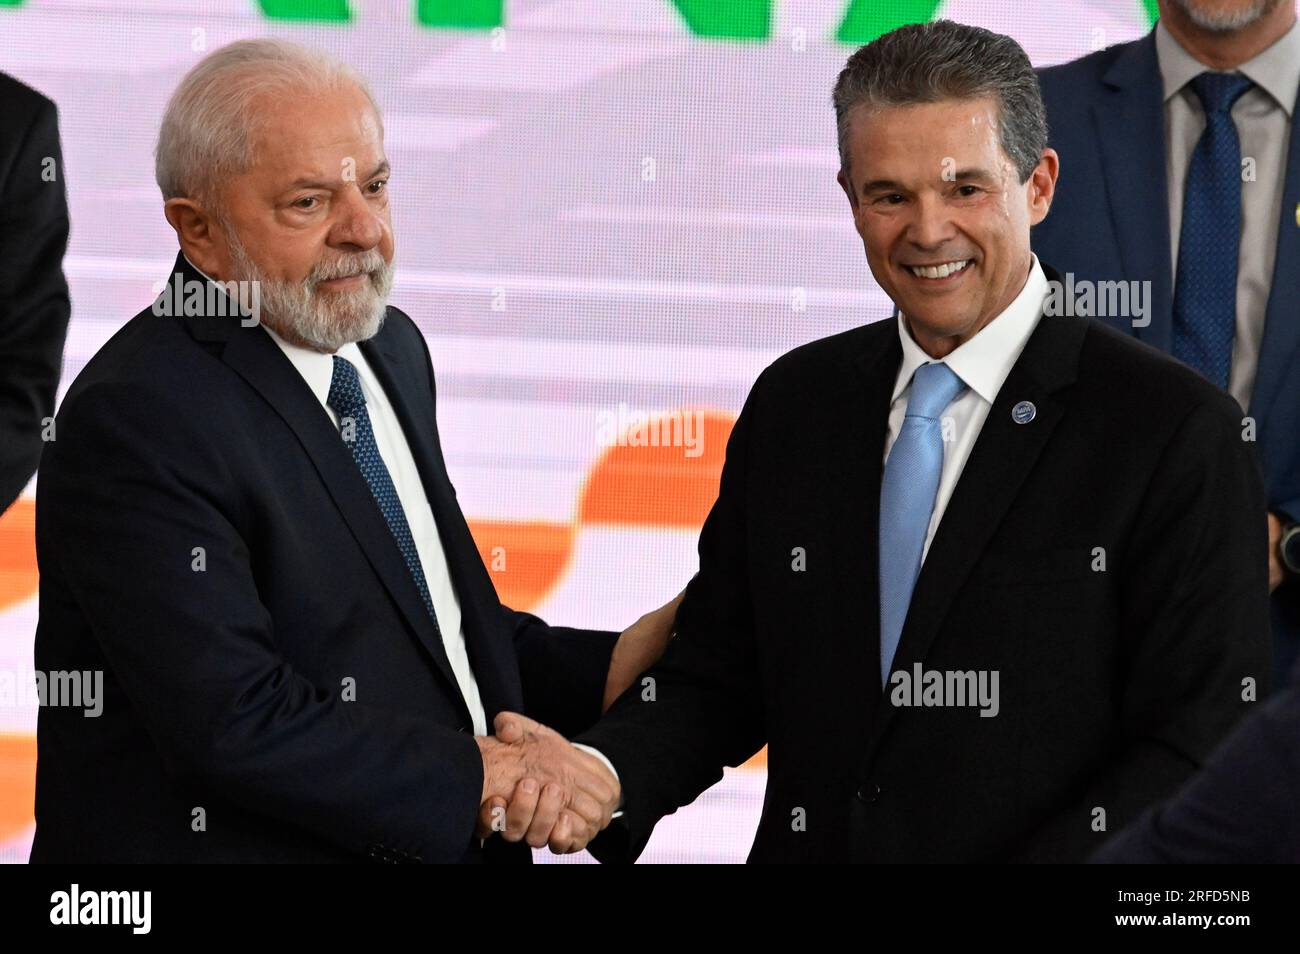 DF - BRASILIA - 08/02/2023 - BRASILIA, LAUNCH CEREMONY OF THE PEOPLE OF ARTISANAL FISHERY PROGRAM - The President of the Republic, Luiz Inacio Lula da Silva, accompanied by the Minister of Fisheries and Aquaculture (MPA), Andre de Paula, during Ceremony for the Launch of the Peoples of Artisanal Fishing Program held this Wednesday, August 2nd. Photo: Mateus Bonomi/AGIF/Sipa USA Stock Photo